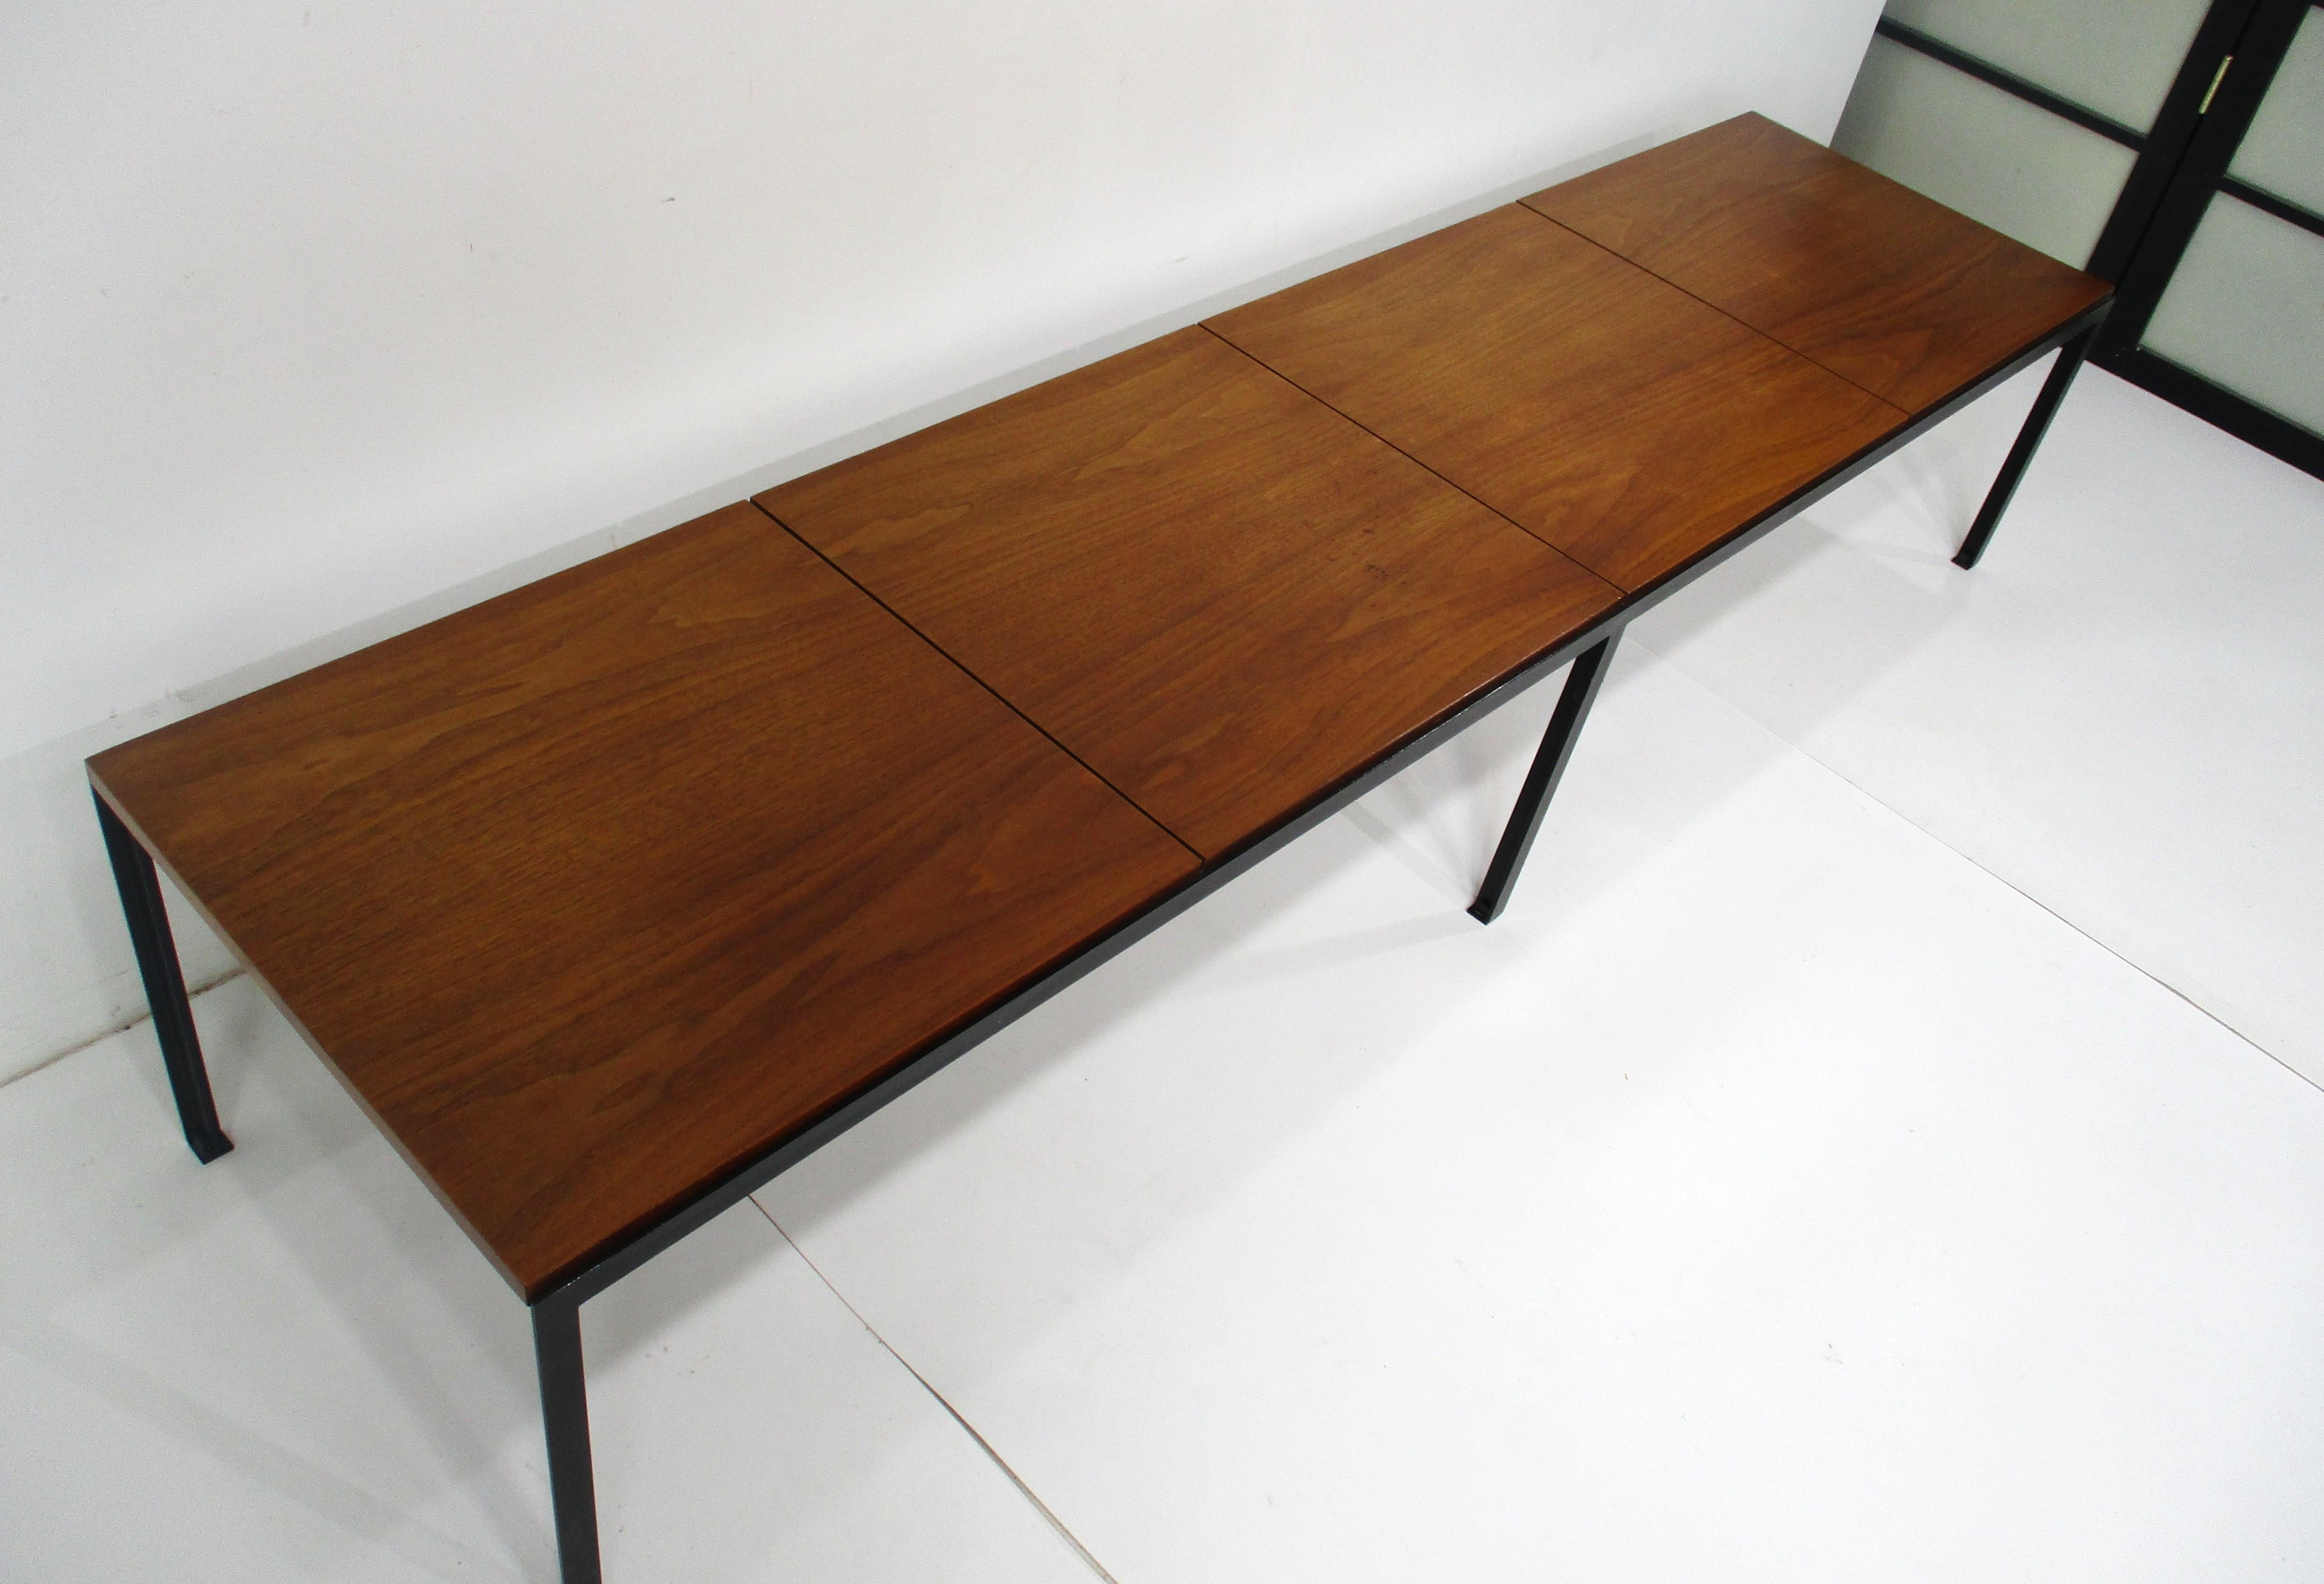 20th Century Early T Angle Walnut Coffee Table / Bench by Florence Knoll # 332 for Knoll (A)  For Sale